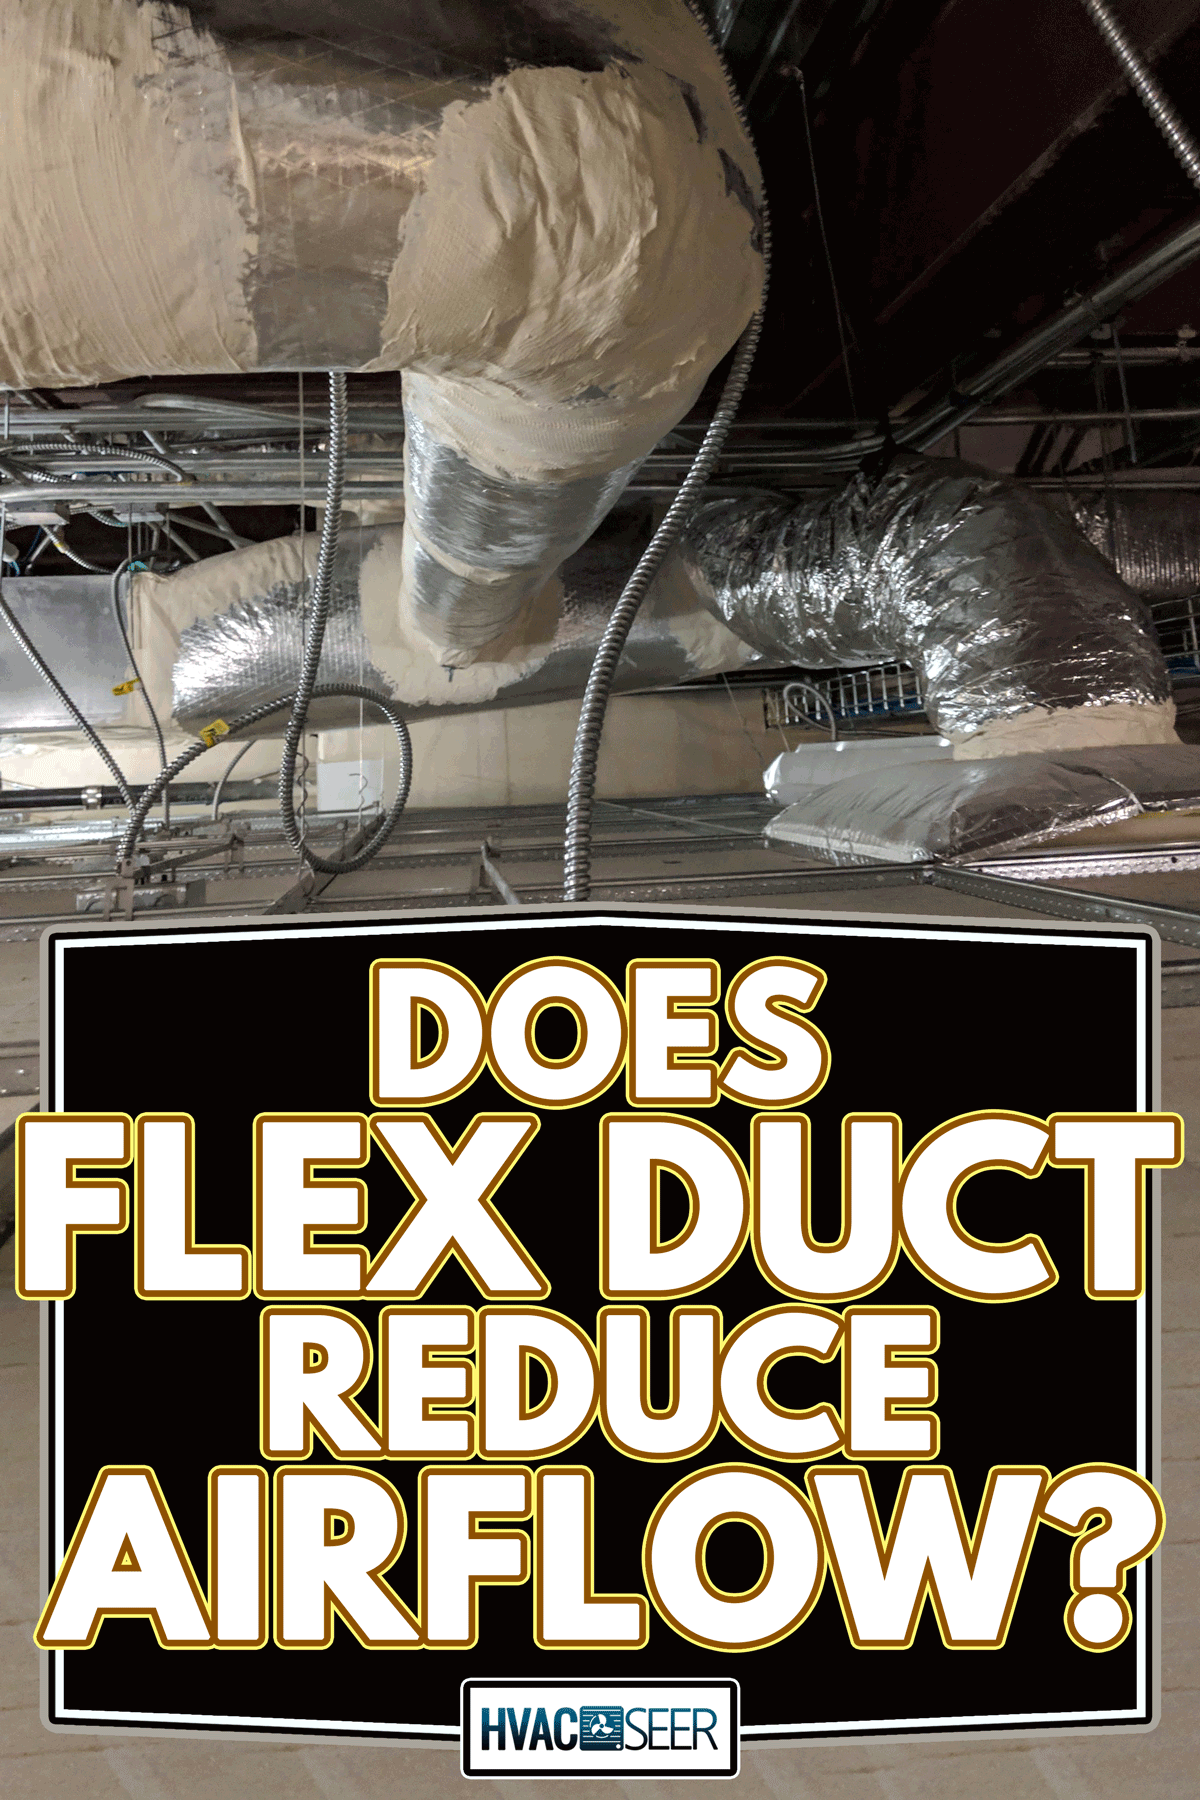 Above ceiling HVAC and electrical systems, Does Flex Duct Reduce Airflow?